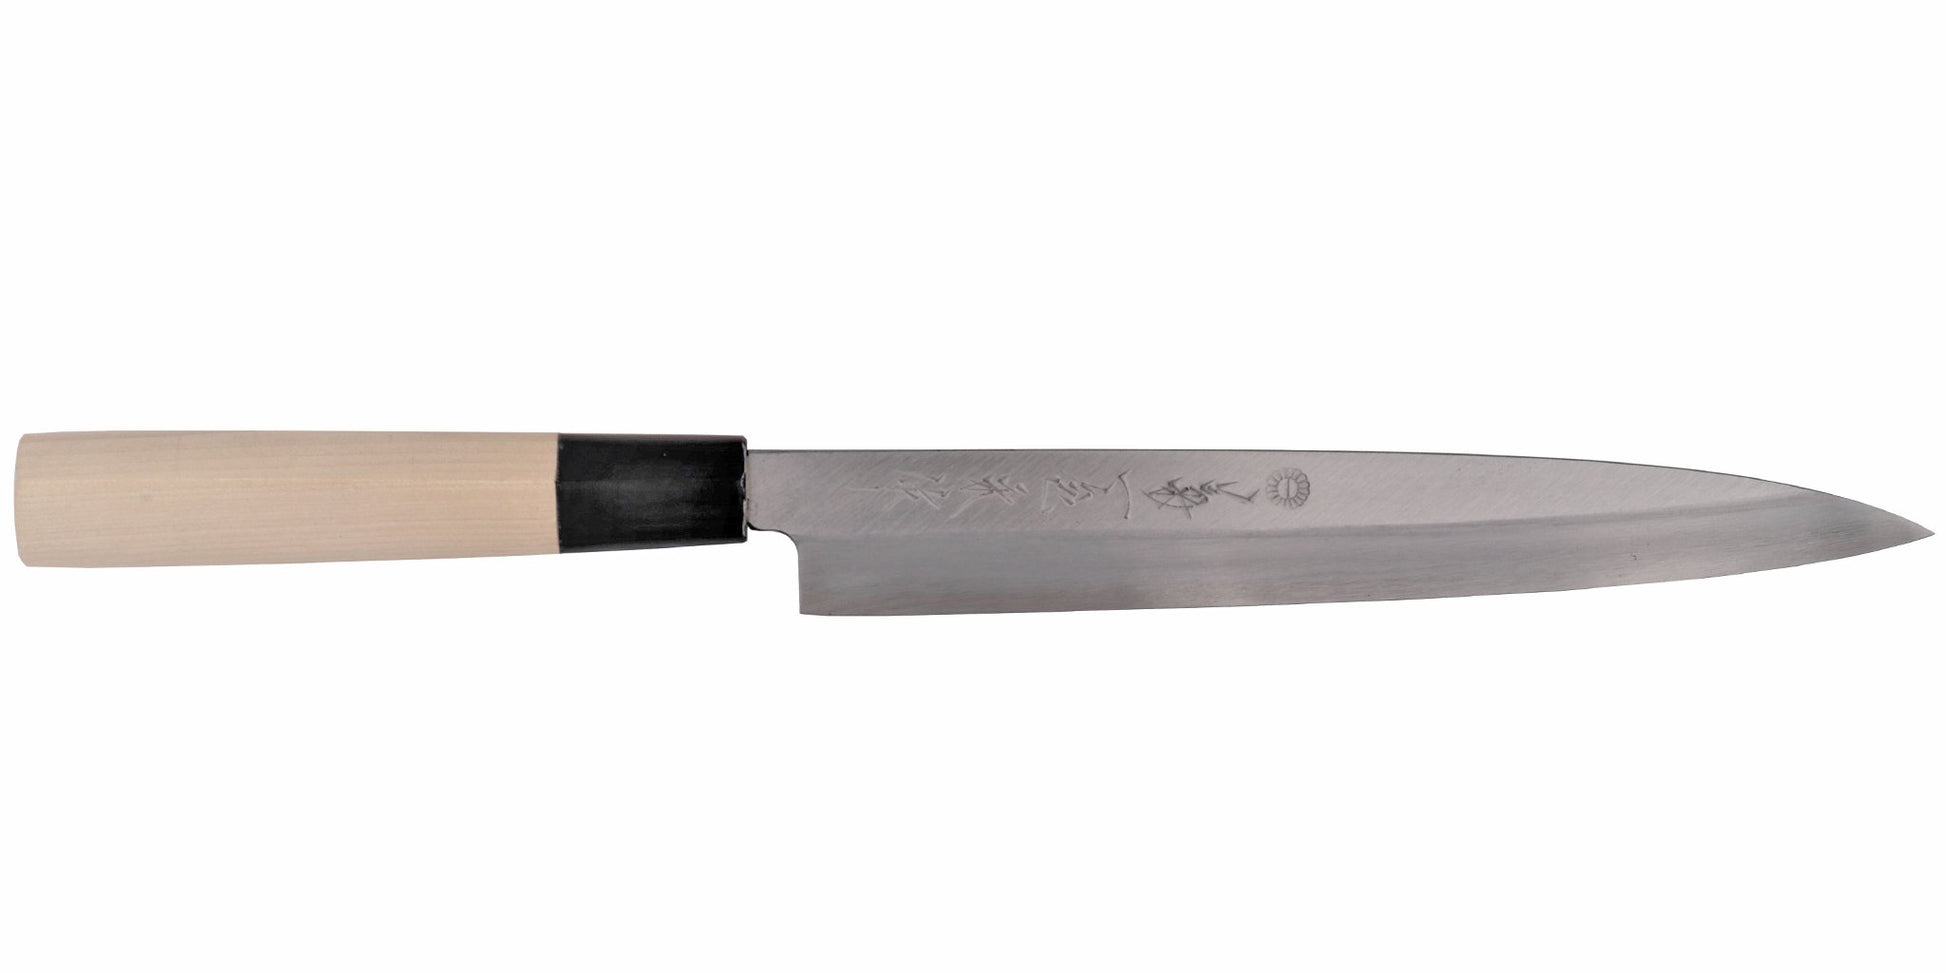 Kikuichi Cutlery Kasumi Series Yanagi. Sashimi knife made of white #2 carbon steel.  Available in sizes 21 cm, 24 cm, 27 cm, 30 cm, and 33 cm.